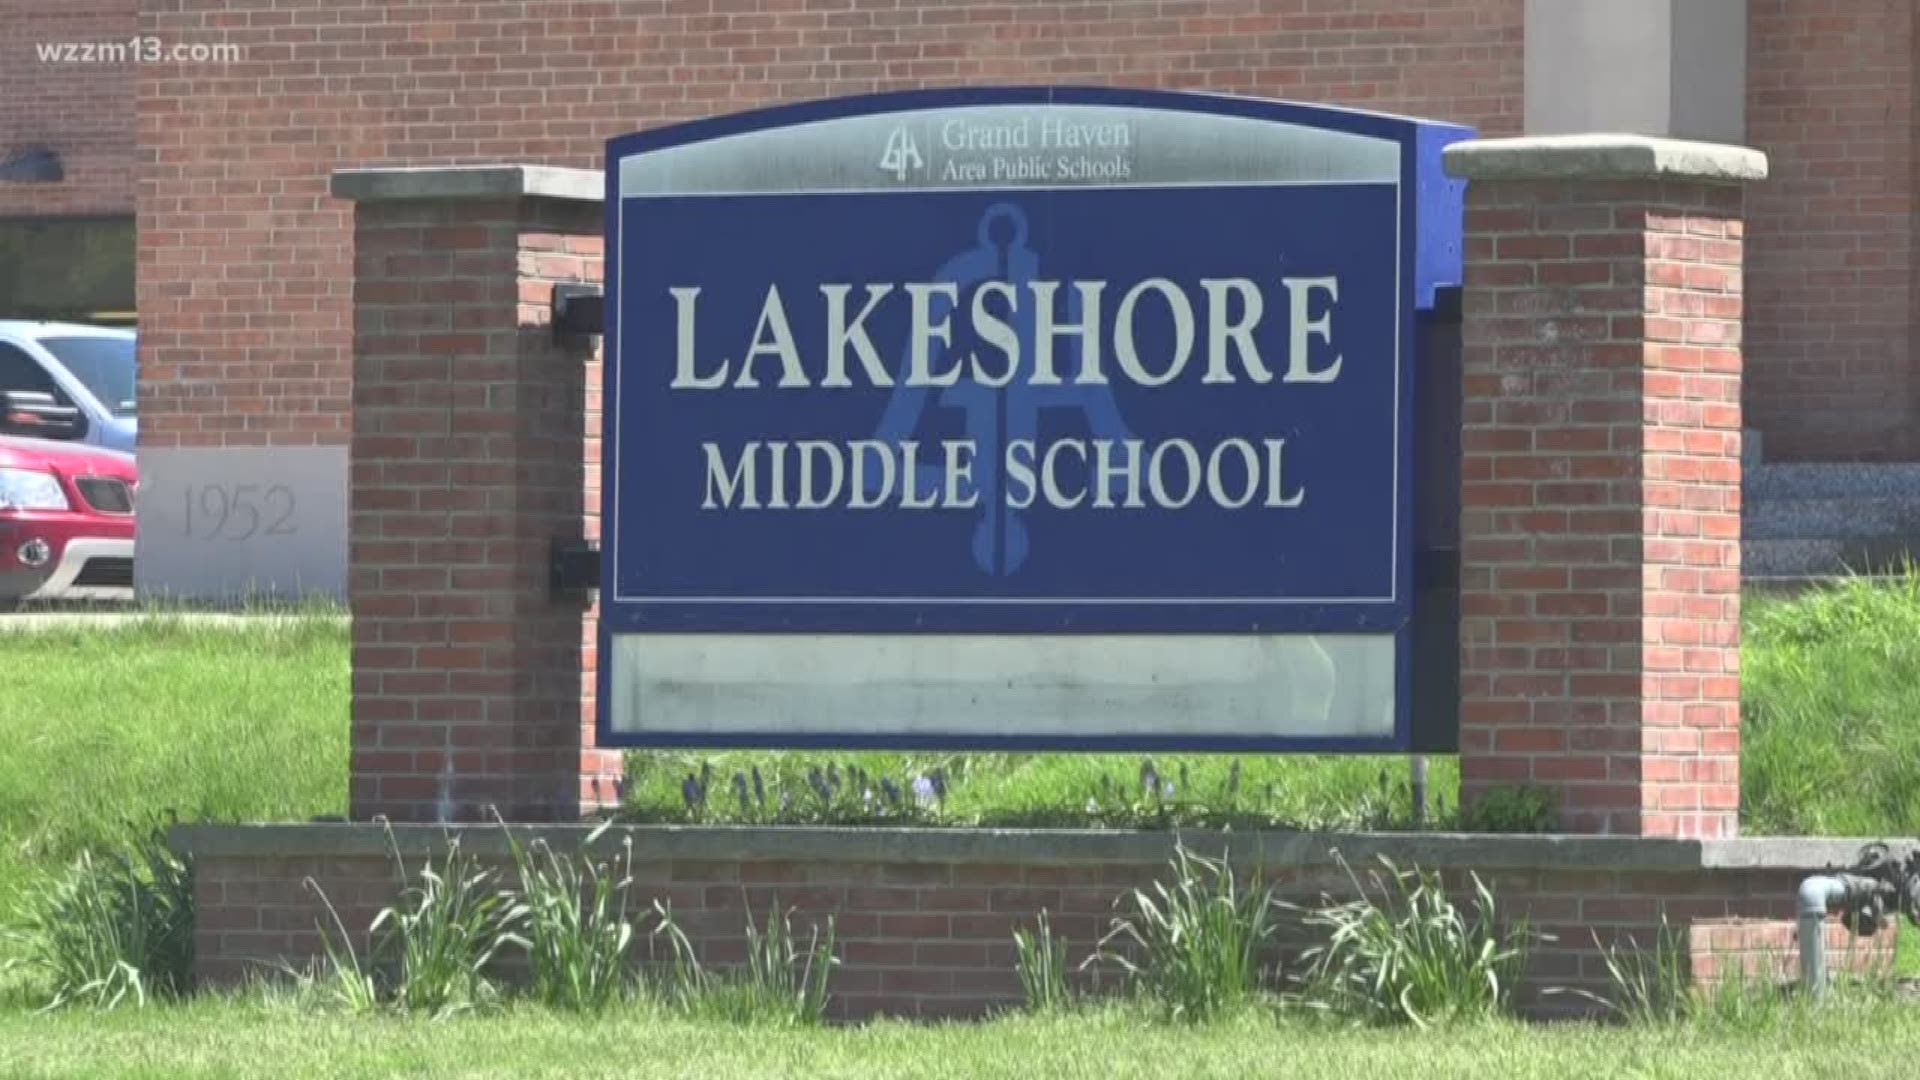 Police investigate threat at middle school in Grand Haven